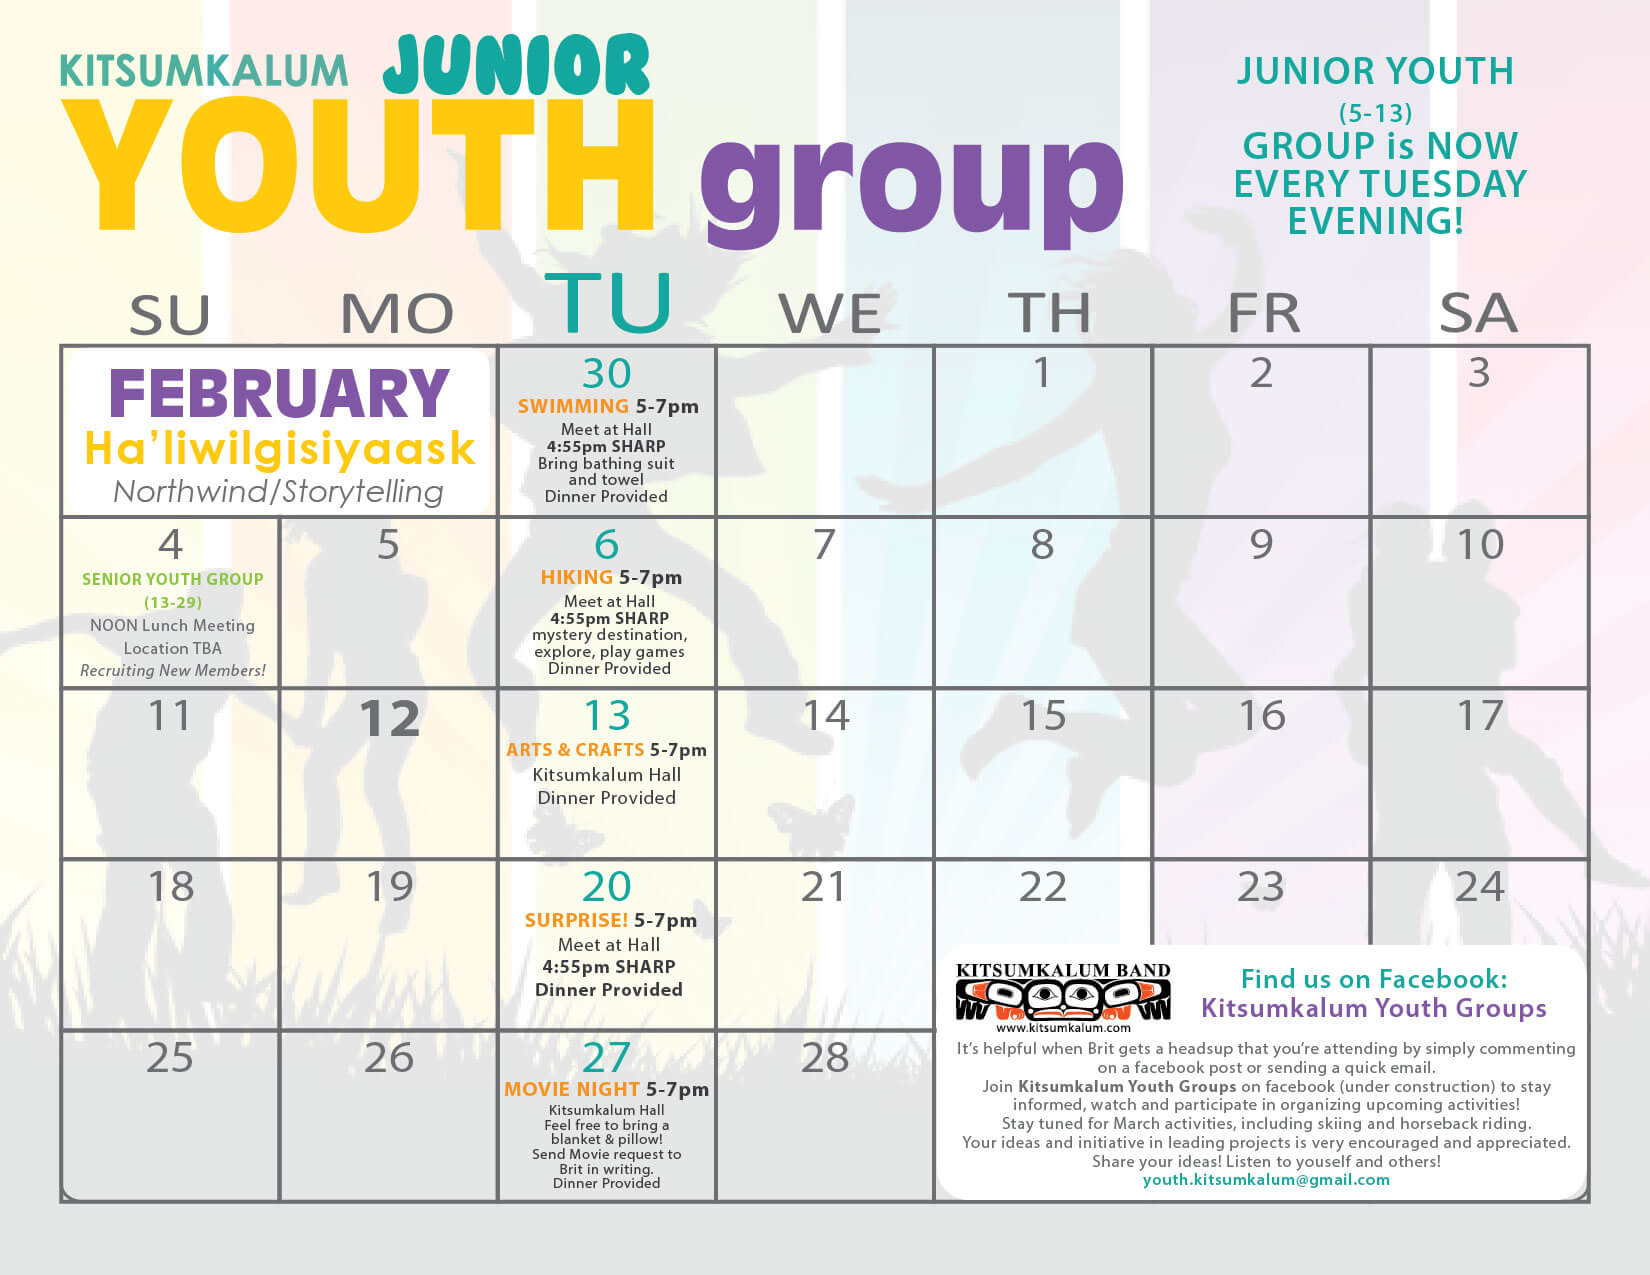 Junior Youth February Events on TUESDAYS